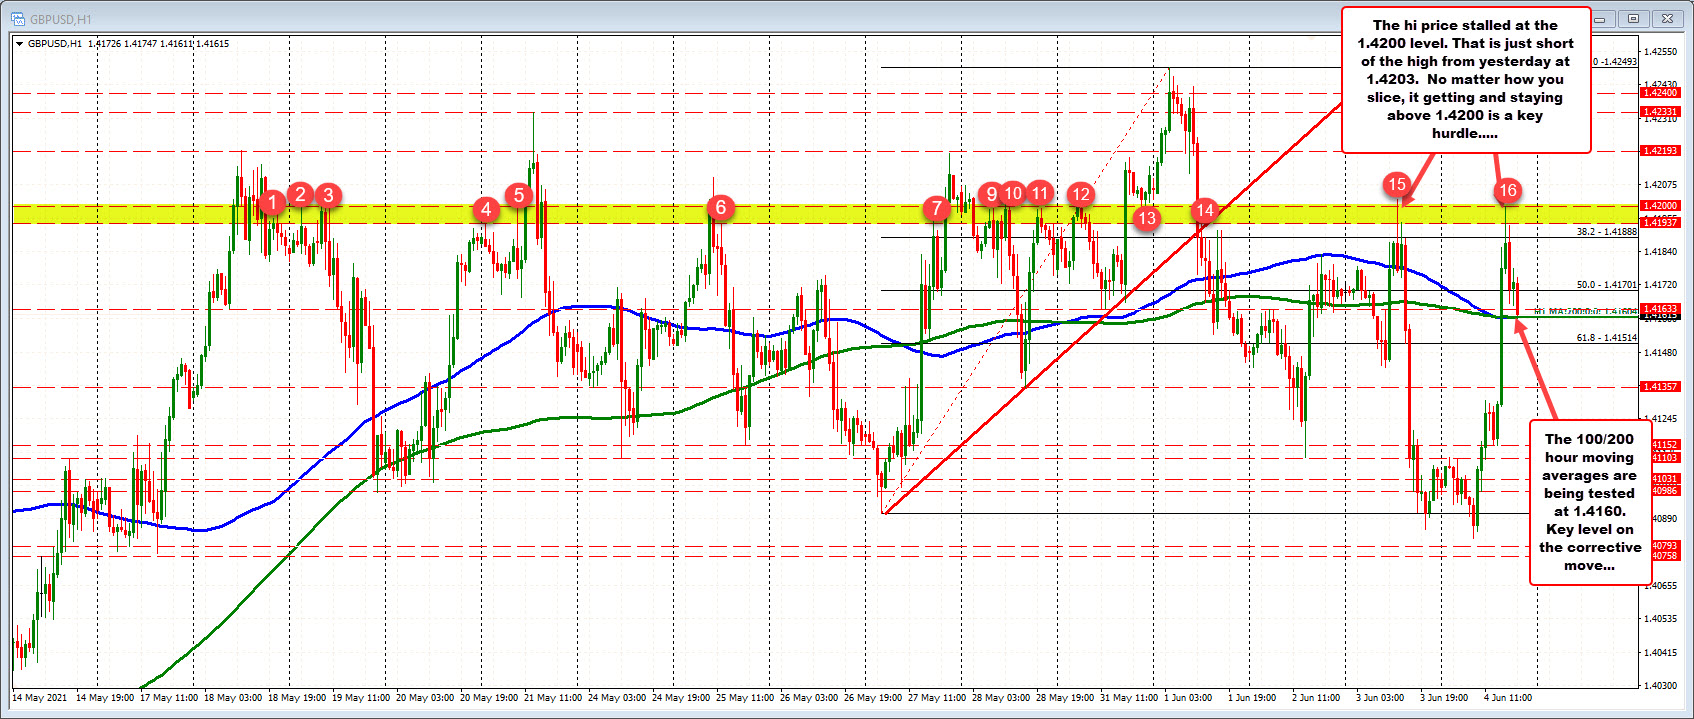 Held resistance at 1.4200 on the run higher